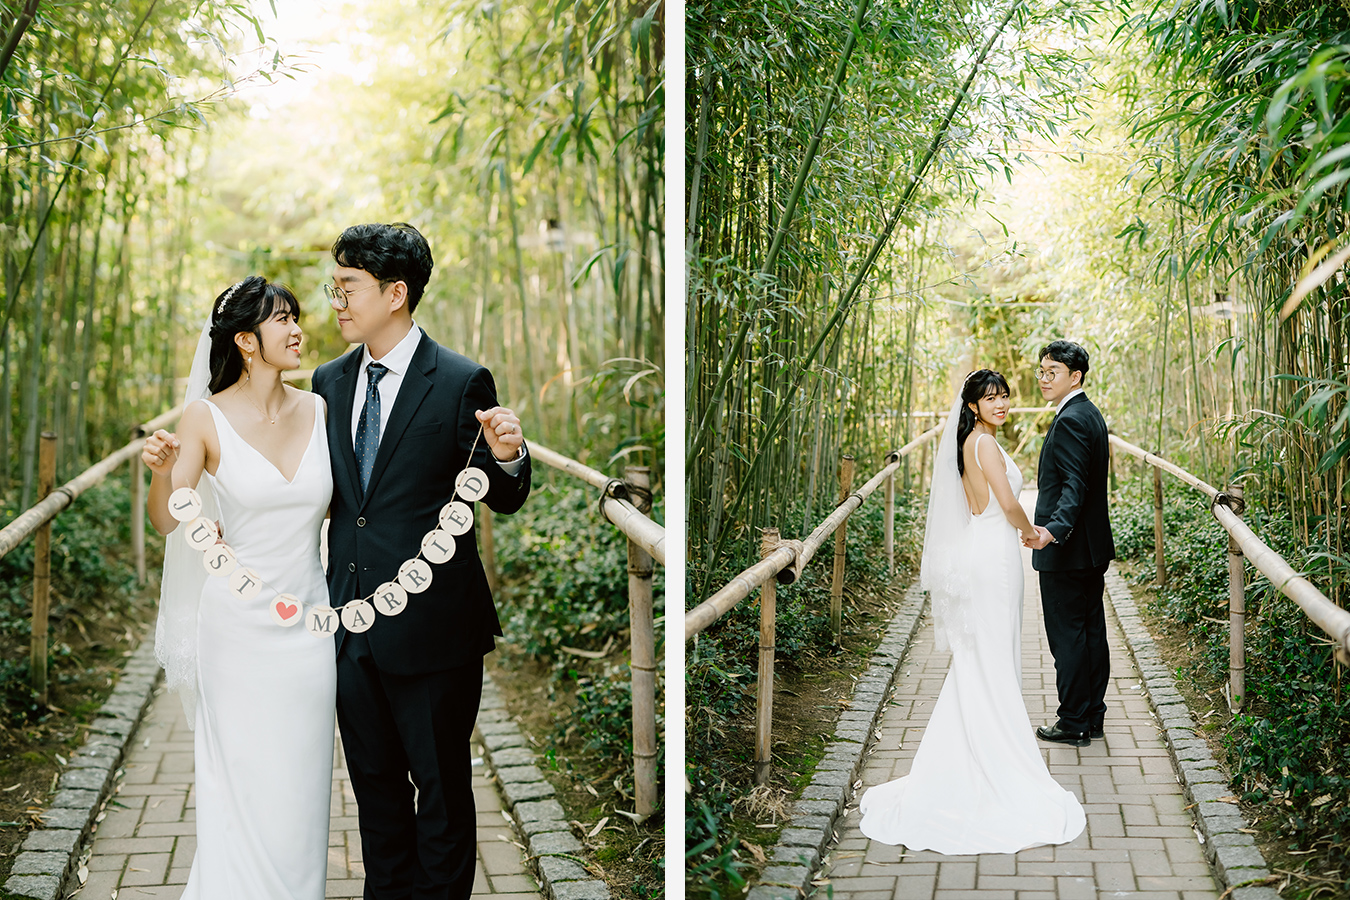 Cute Korea Pre-Wedding Photoshoot Under the Cherry Blossoms Trees by Jungyeol on OneThreeOneFour 11